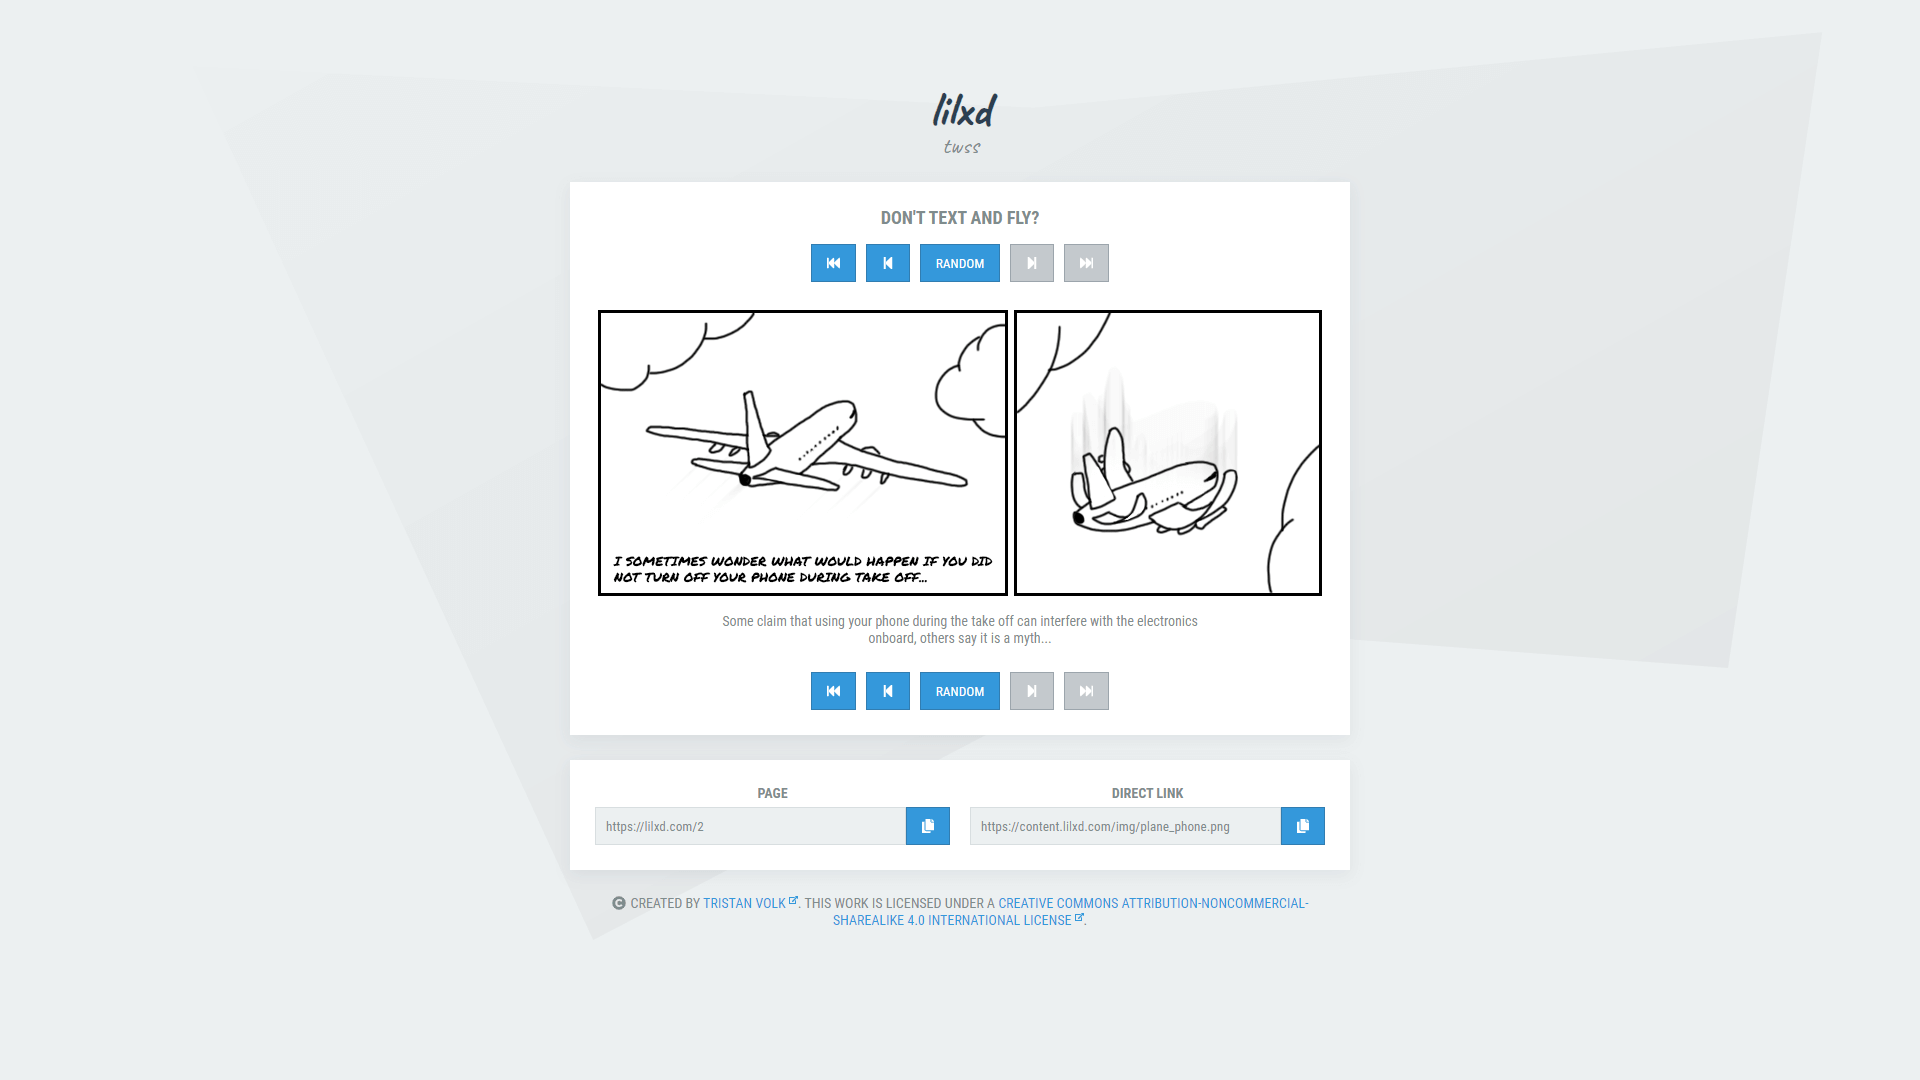 A screenshot of the lilxd.com site showing a comic in the centre.